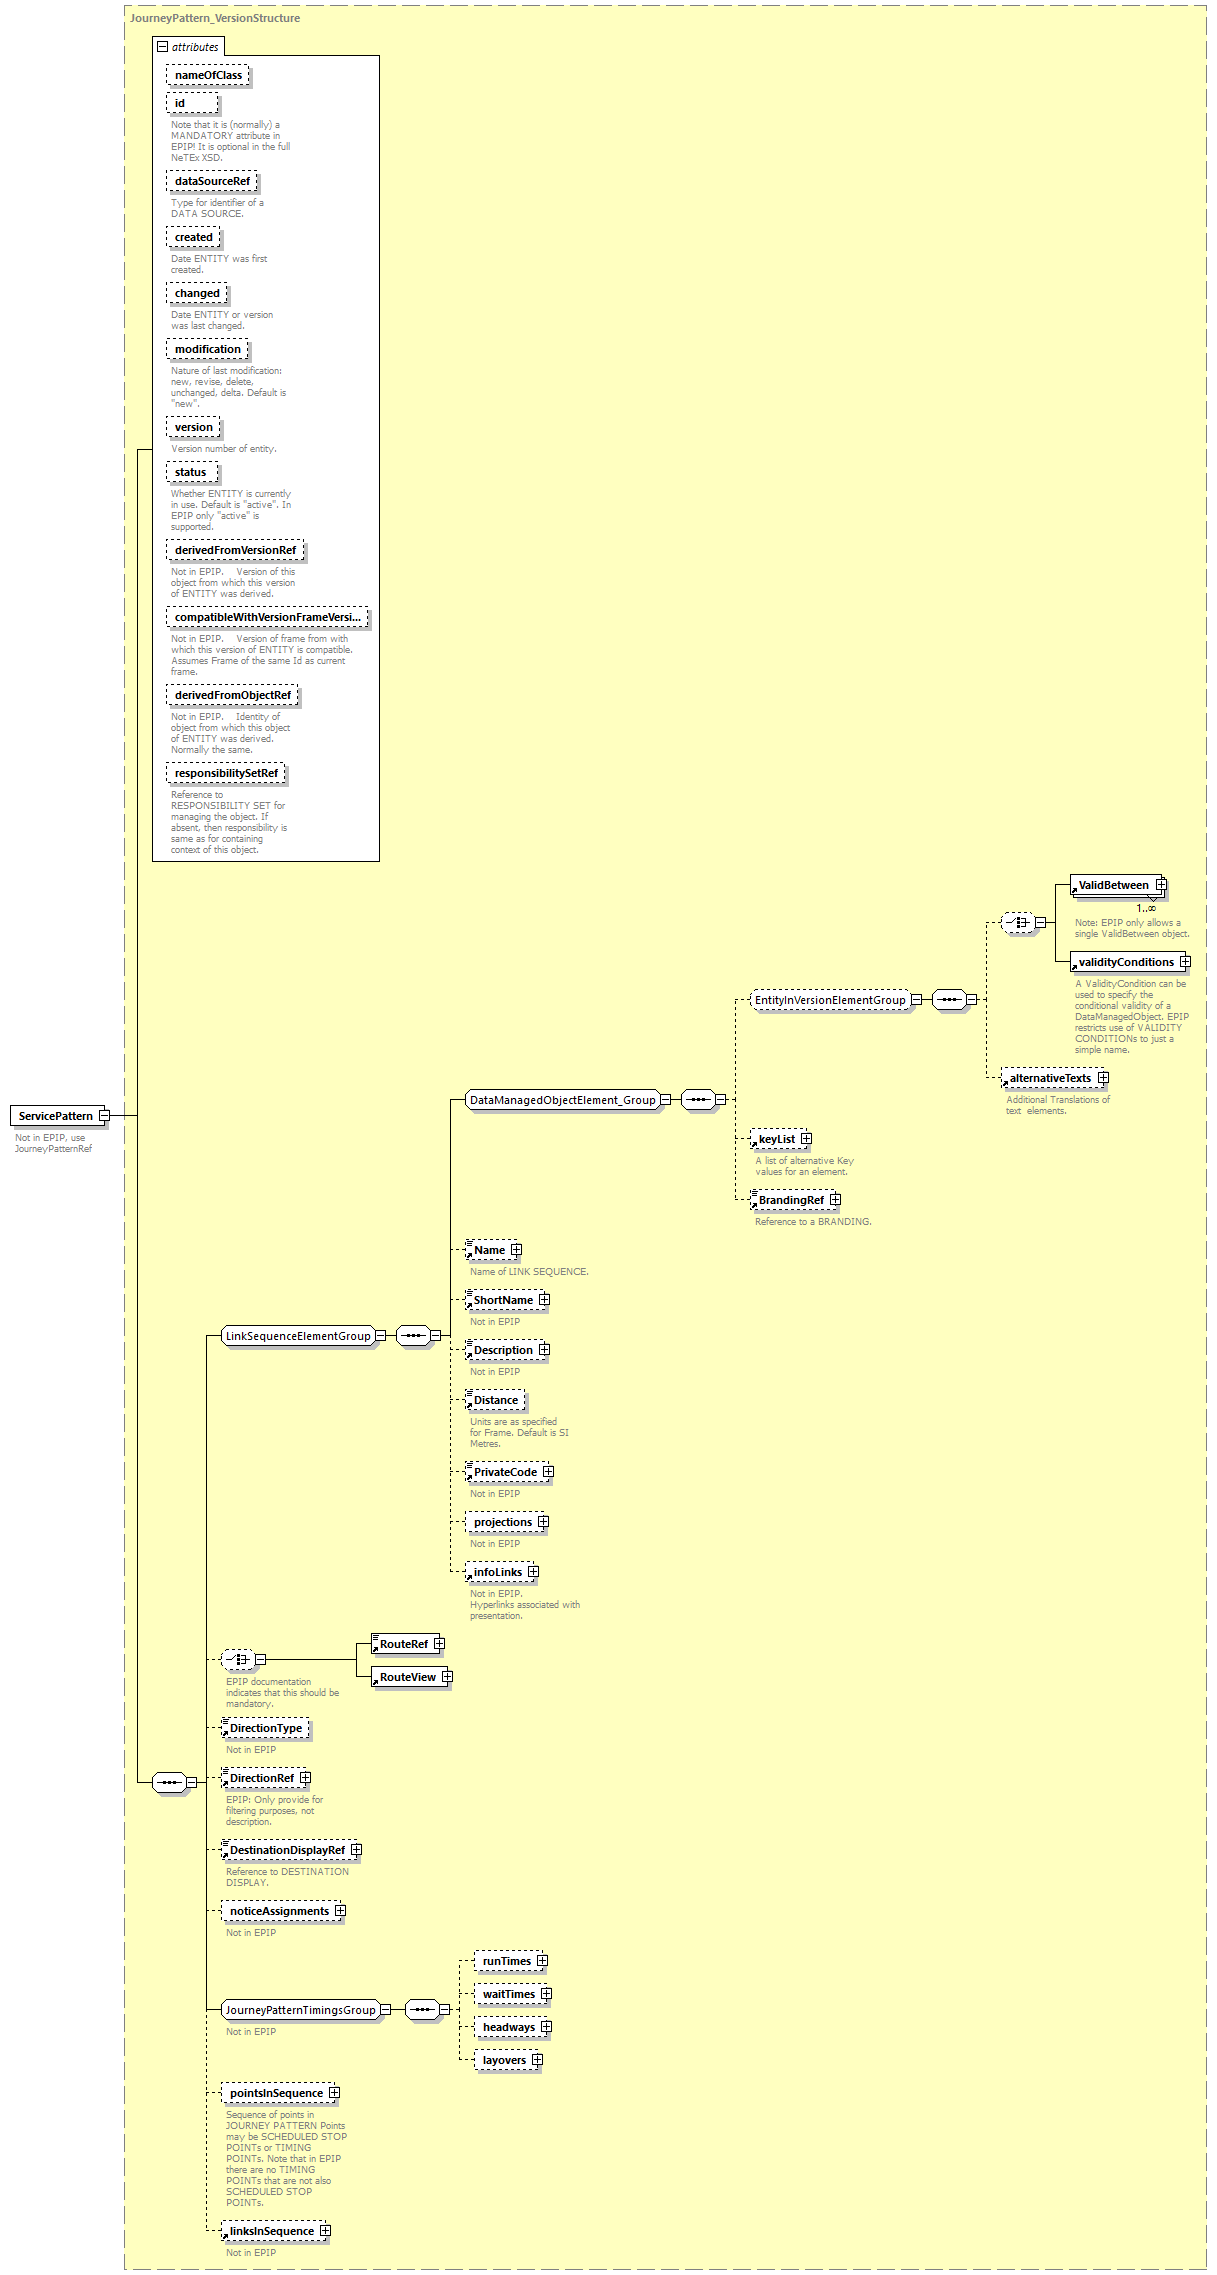 reduced_diagrams/reduced_p414.png